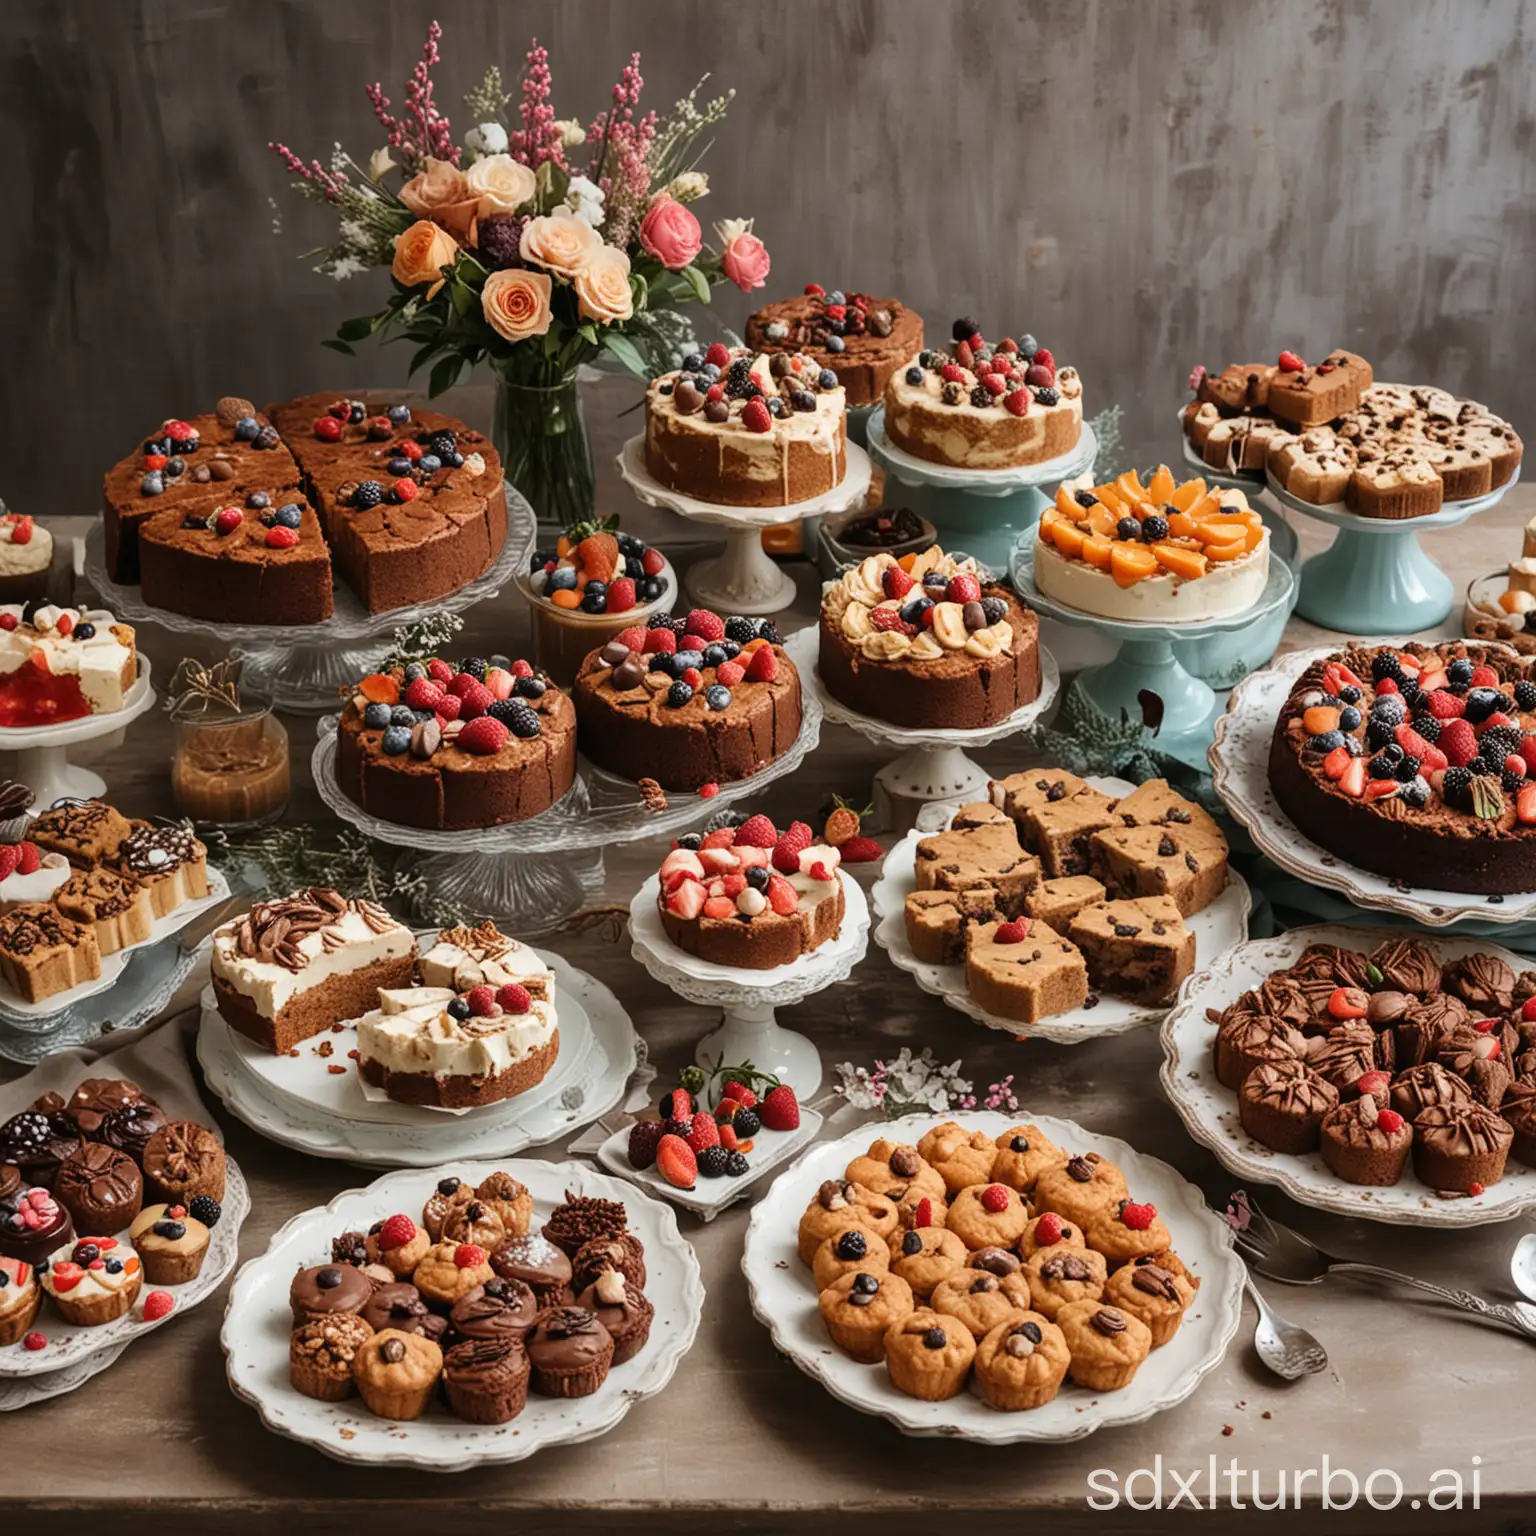 A table filled with a variety of sugar-free desserts, such as cakes, cookies, and brownies. The desserts are all beautifully decorated and look delicious.